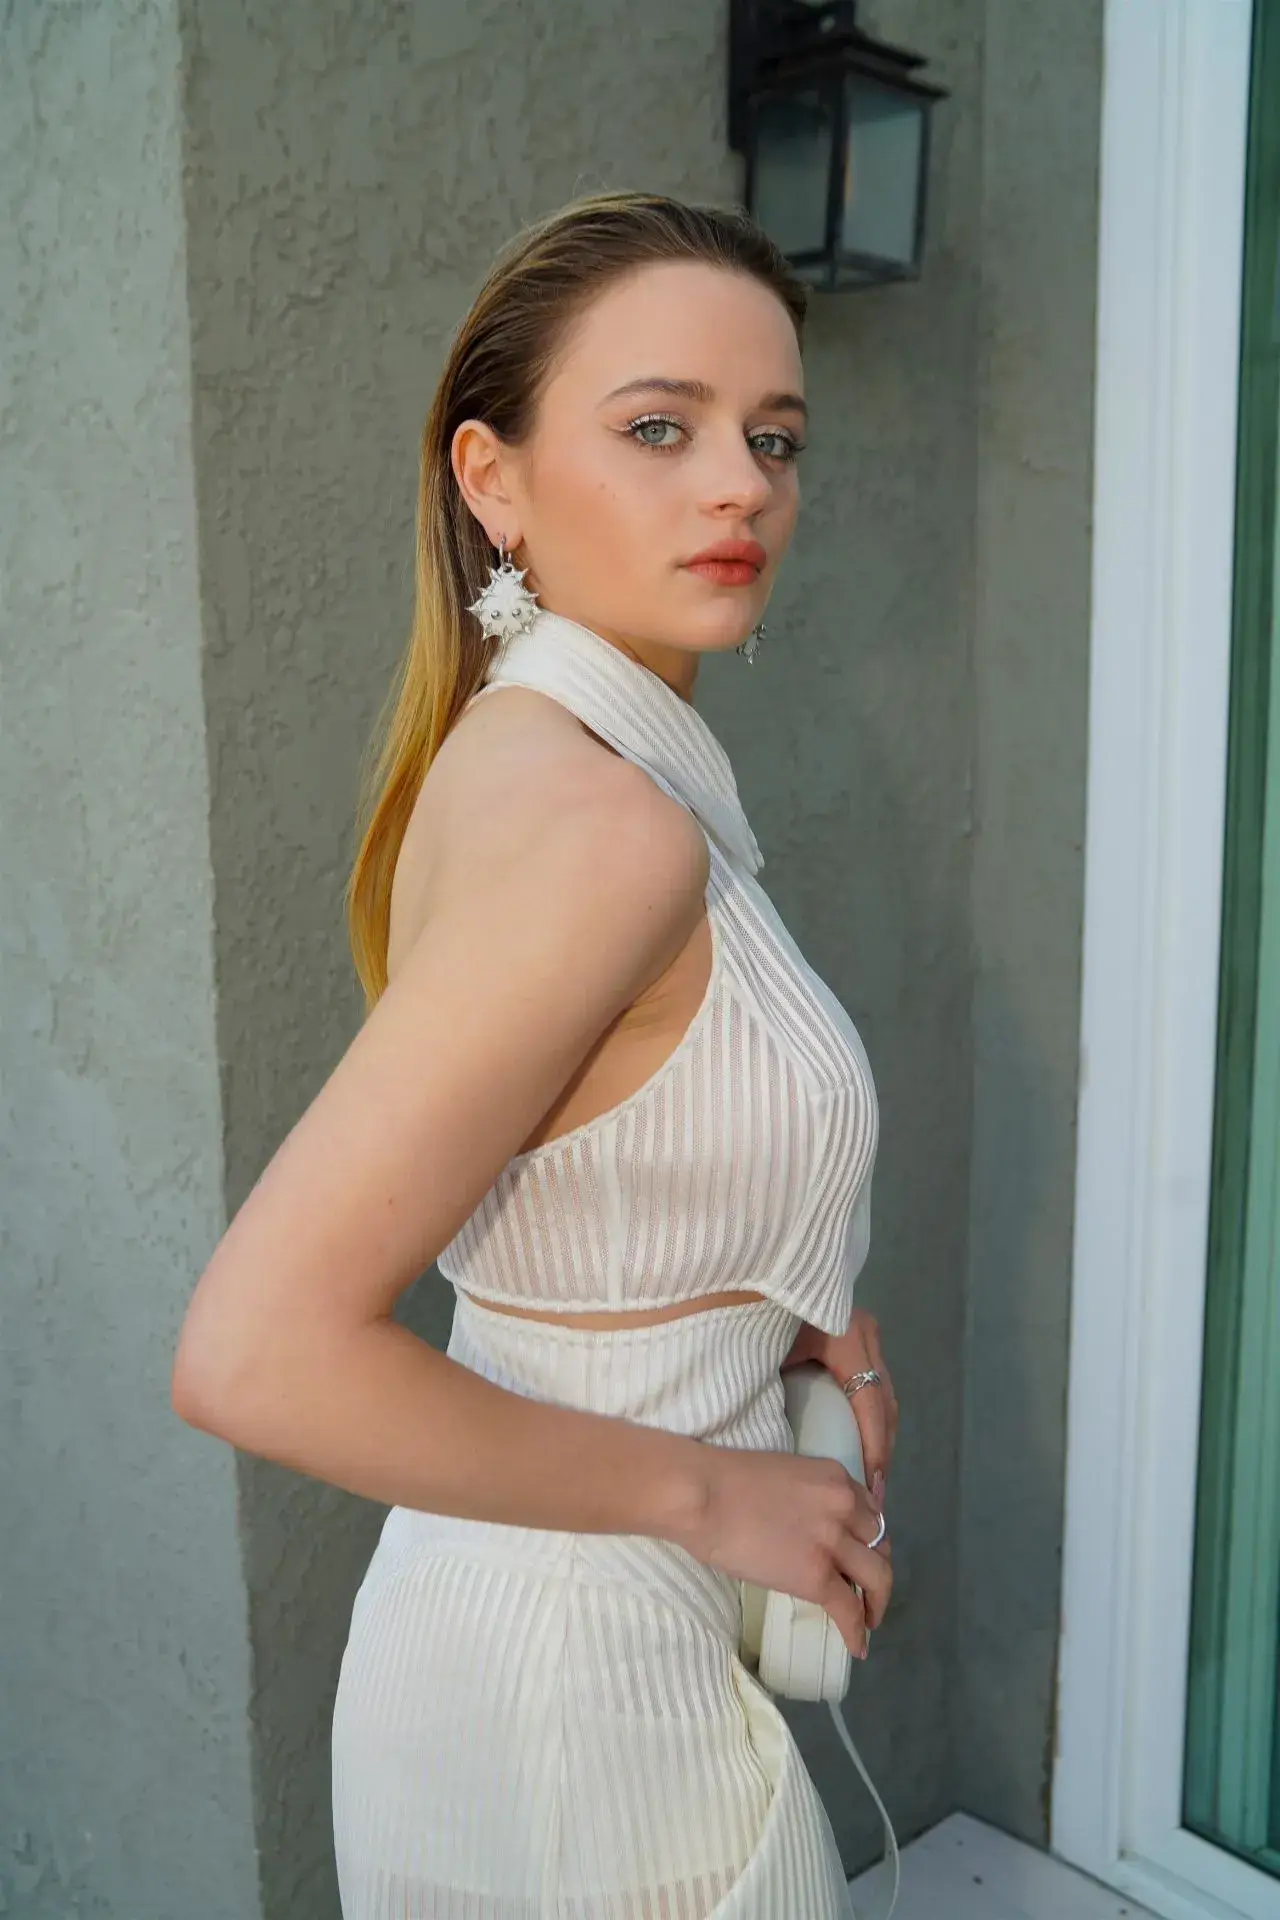 AMERICAN ACTRESS JOEY KING PHOTOSHOOT IN WHITE DRESS 6